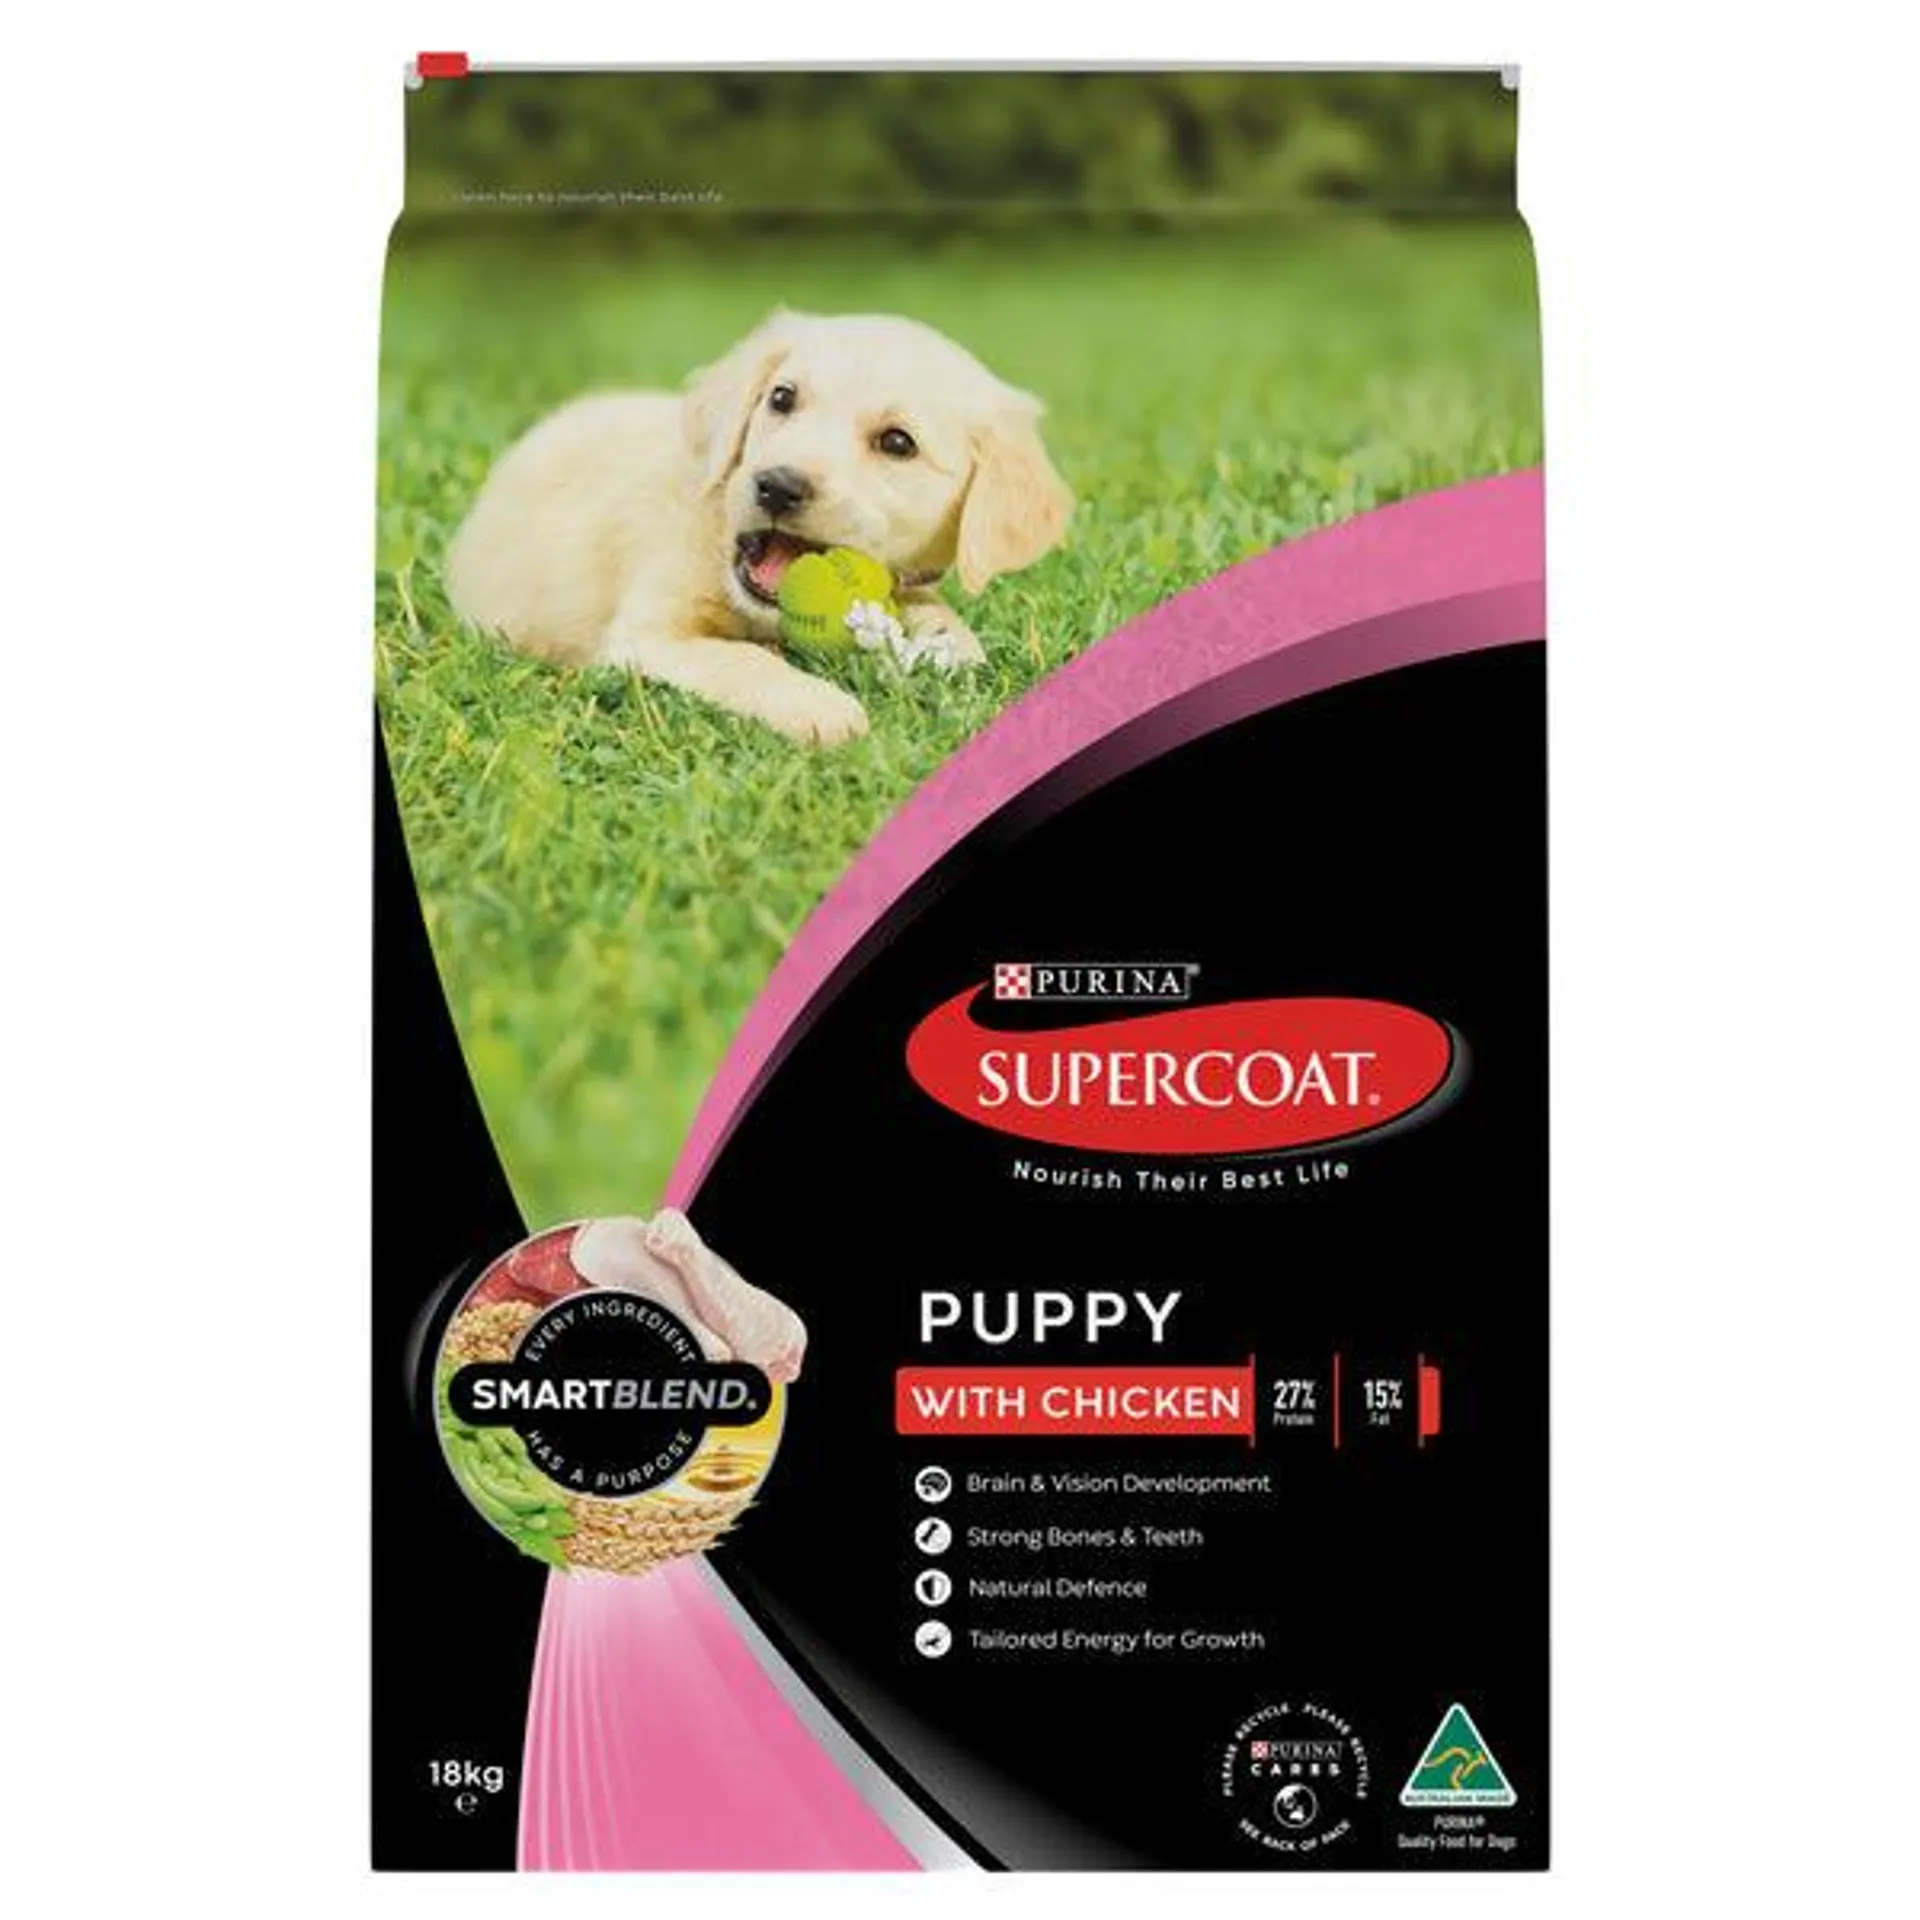 Supercoat - Puppy with Chicken Dog Dry Food (18kg)